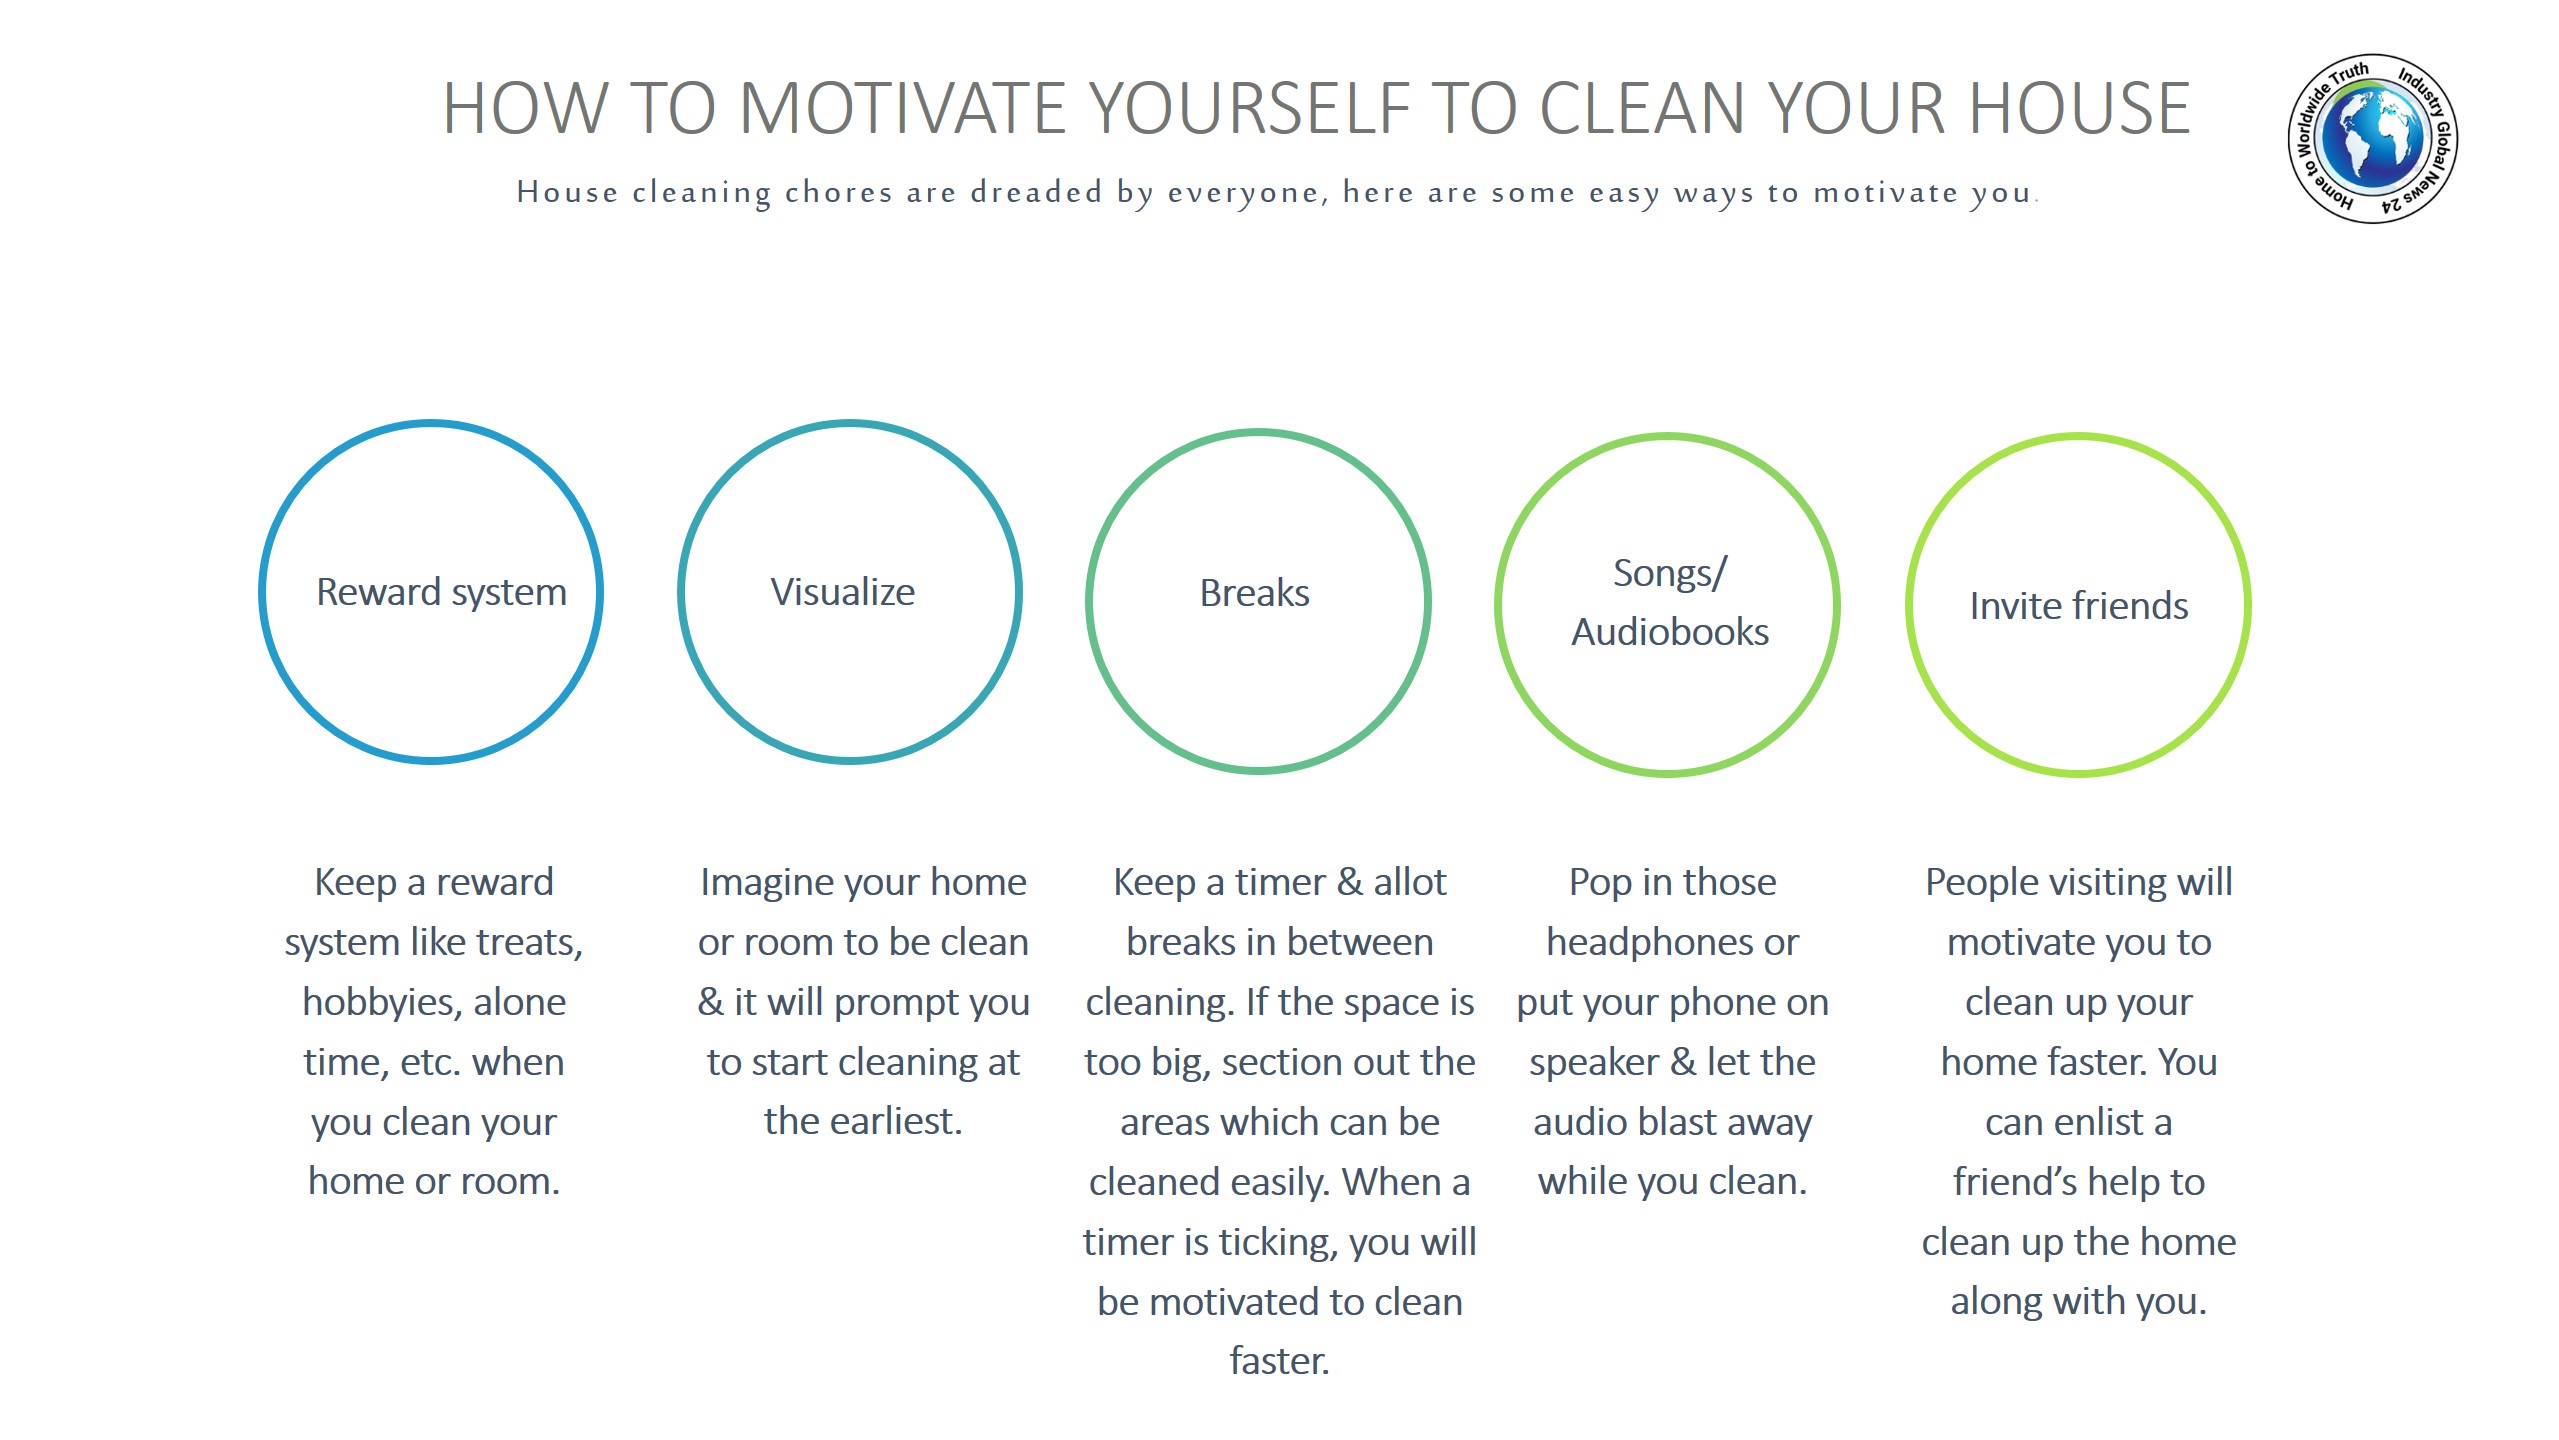 How to motivate yourself to clean your house